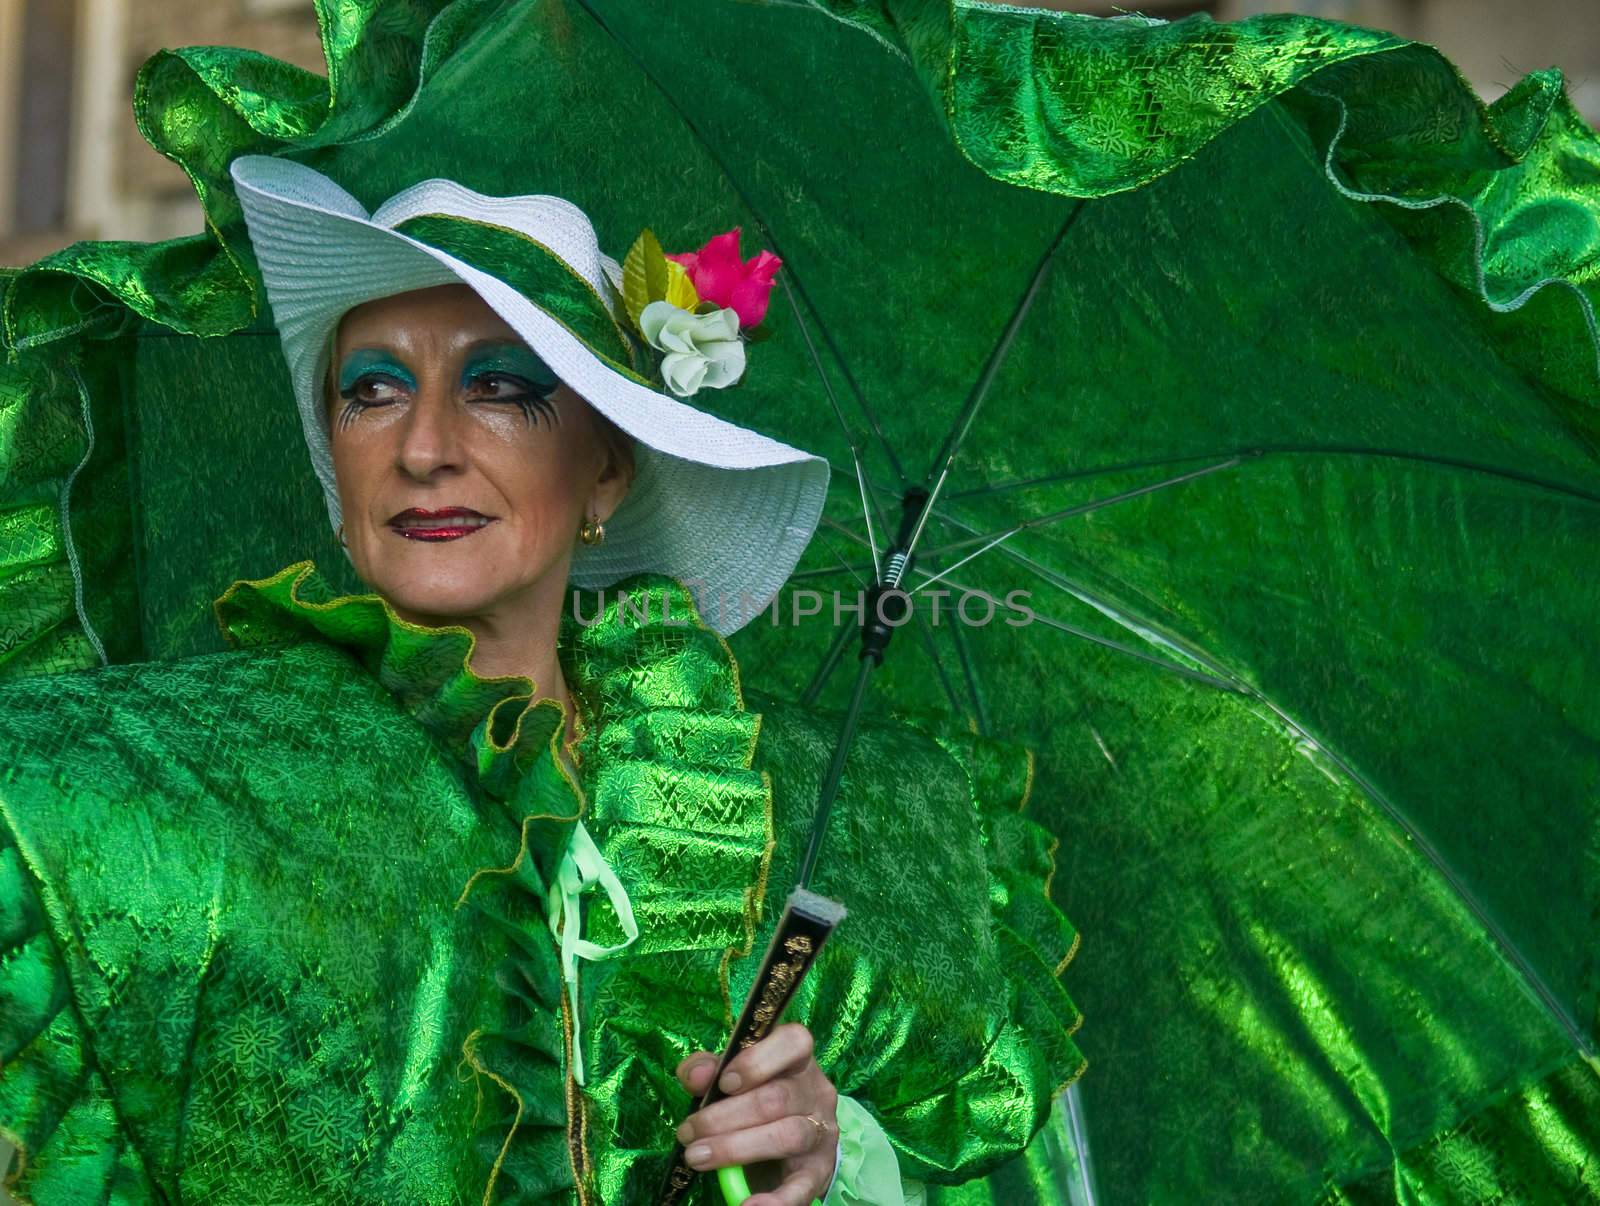 MONTEVIDEO, URUGUAY - FEBRUARY 05 2011 : A costumed carnaval participant in the annual national festival of Uruguay ,held in Montevideo Uruguay on February 05 2011 